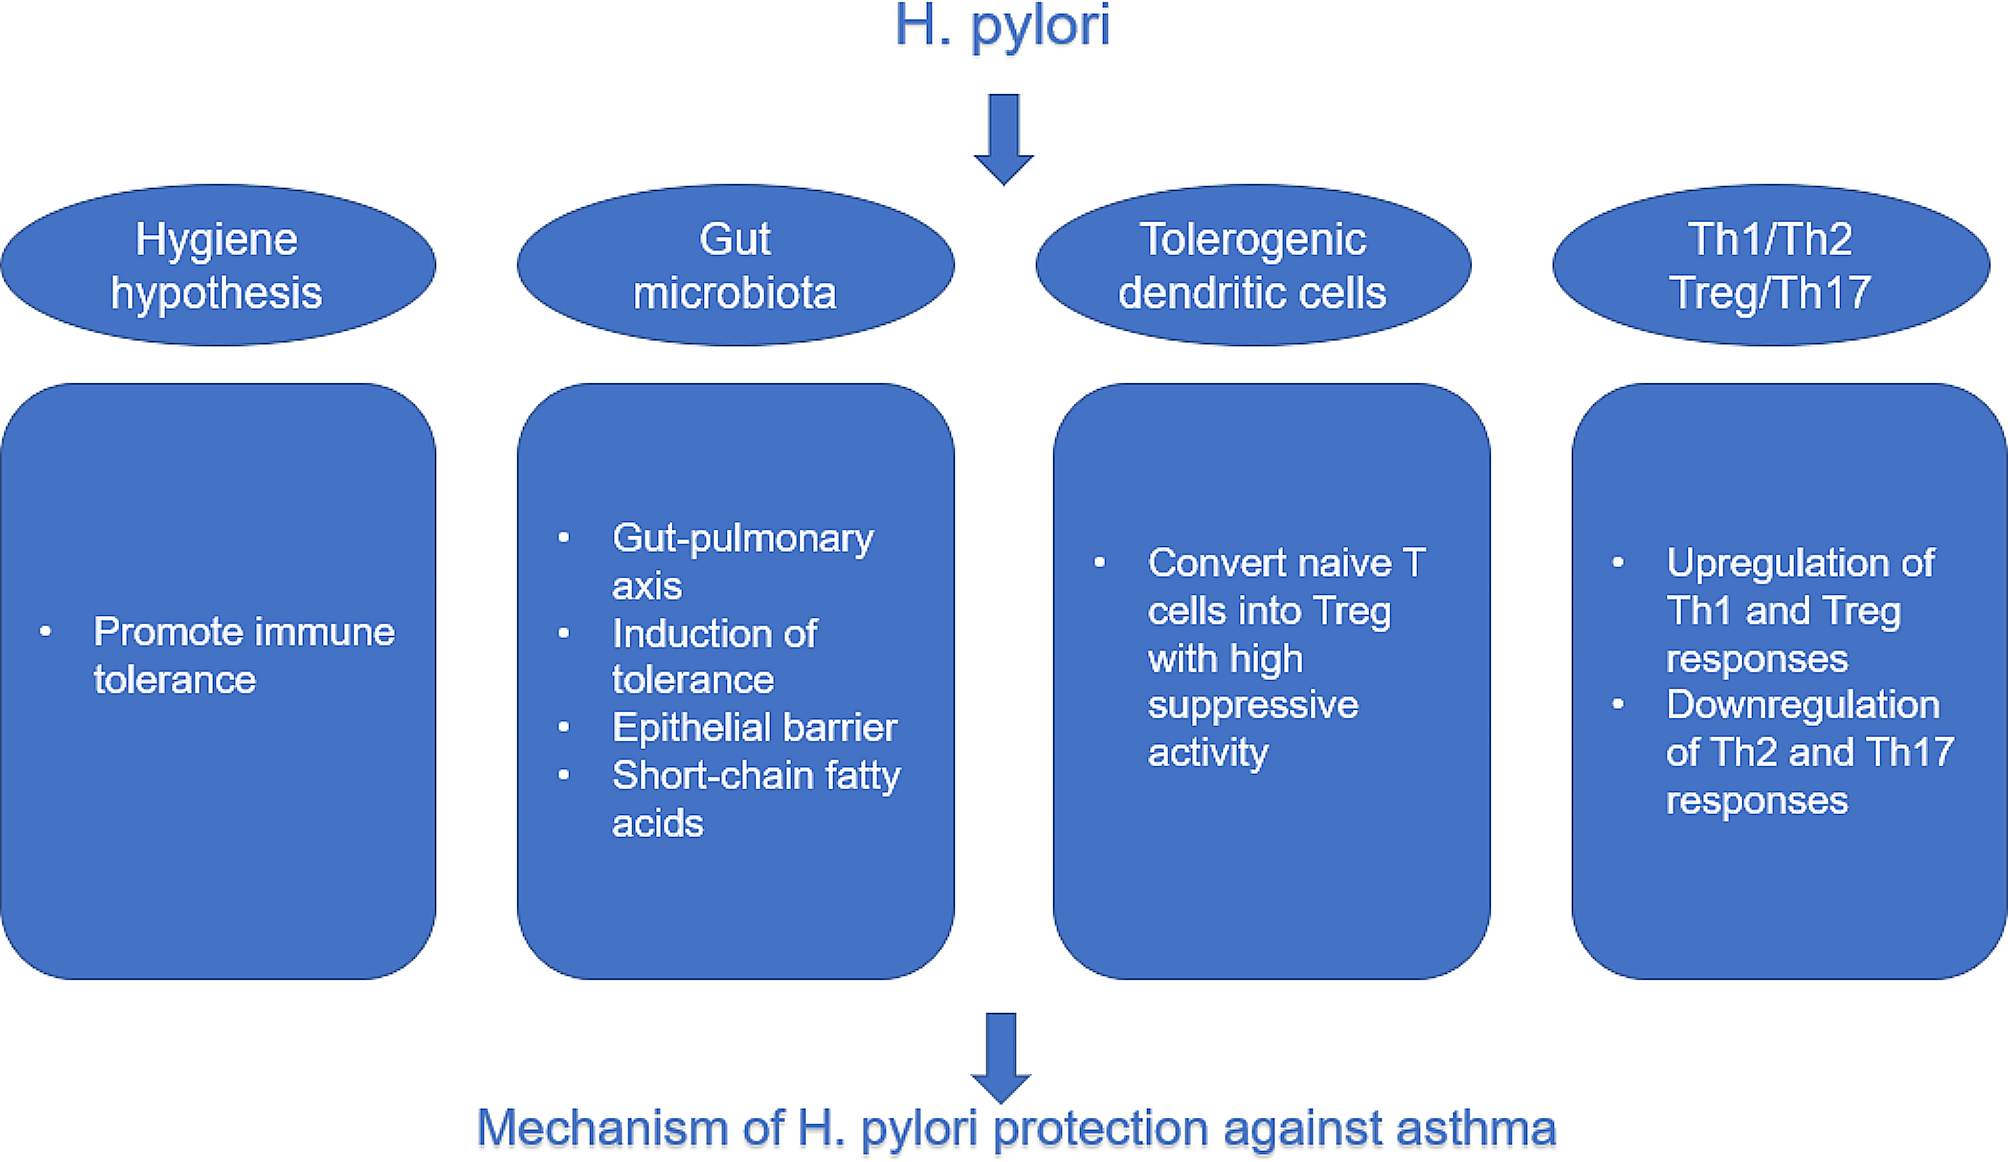 Update on the association between Helicobacter pylori infection and asthma in terms of microbiota and immunity